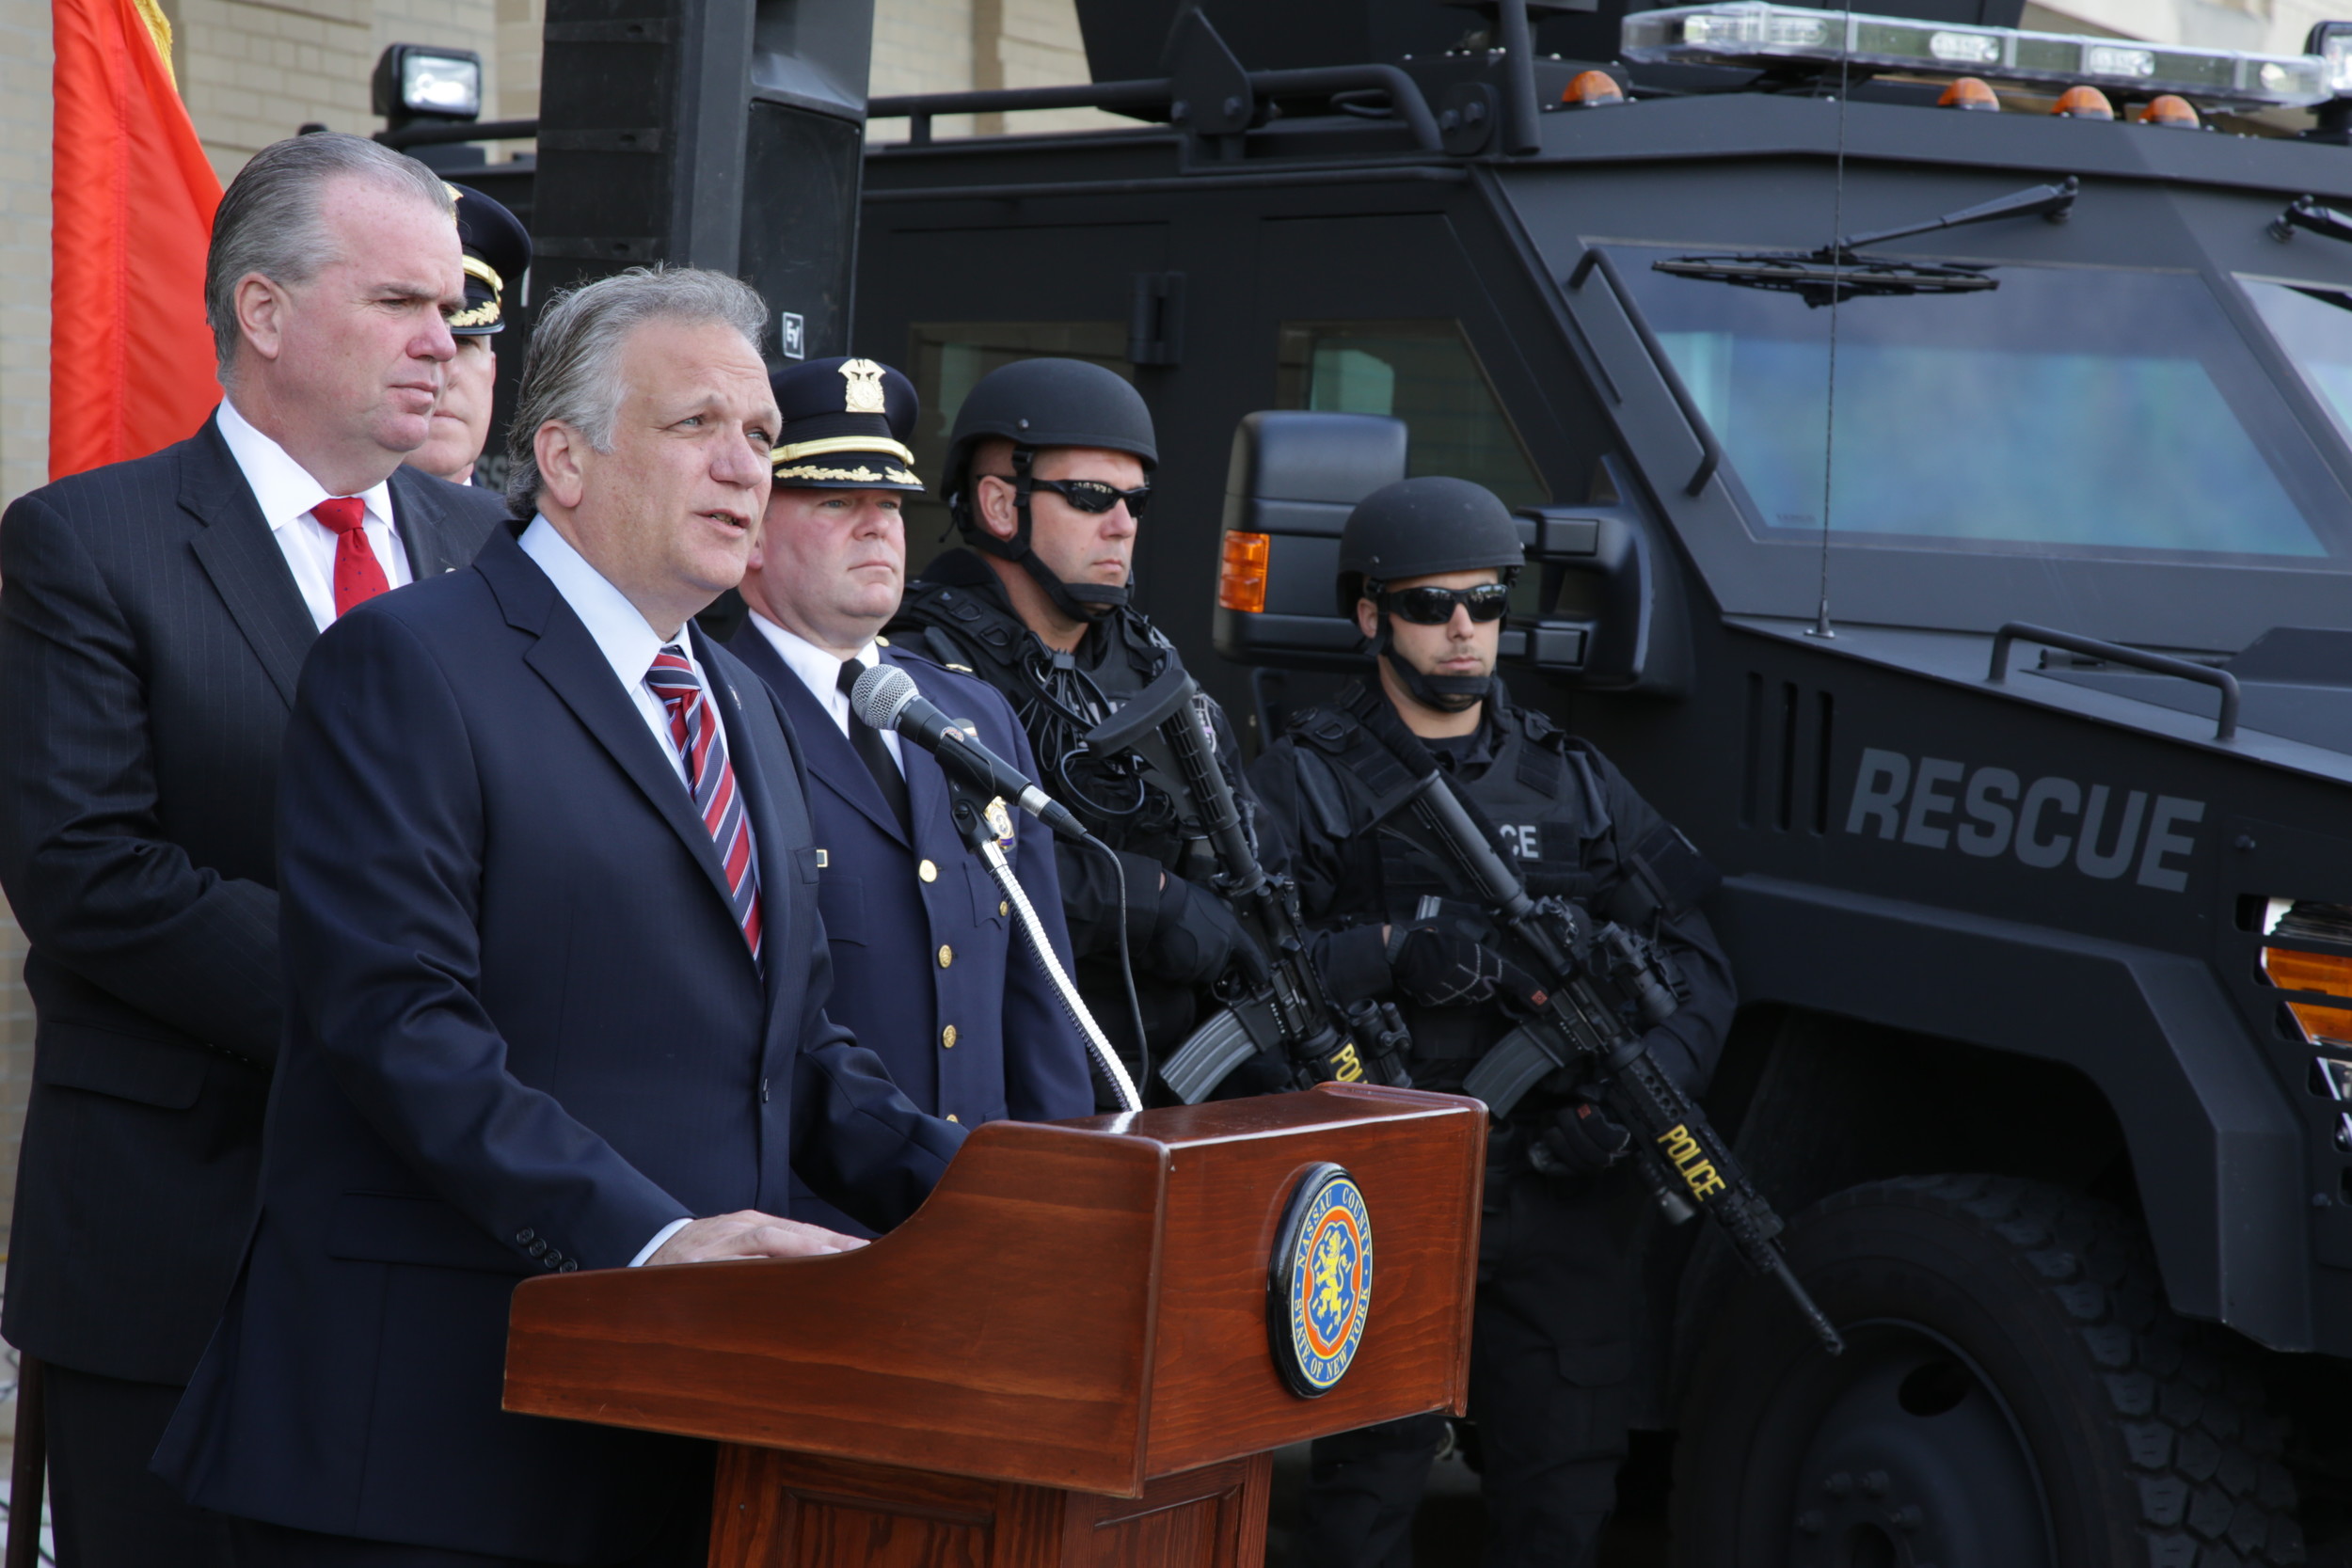 County Executive Ed Mangano, with Acting Police Commissioner Thomas Krumpter, announced increase police surveillance in the wake of the mass shooting in Orlando.